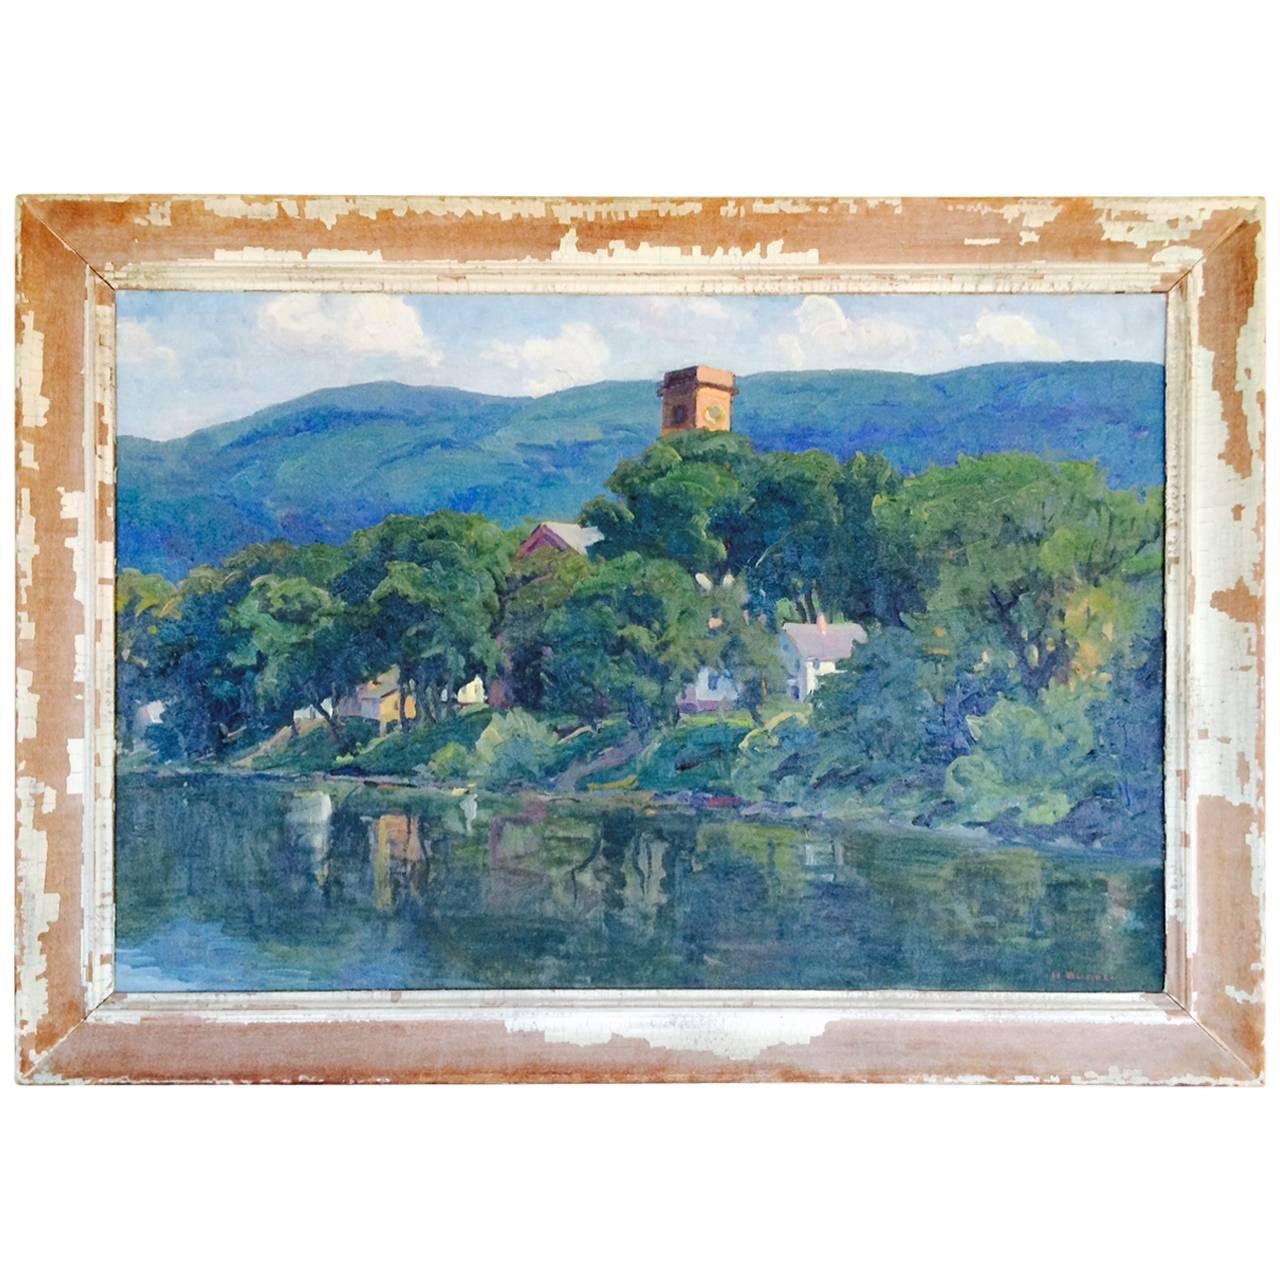 Hortense Budell Oil Painting Titled "River Front, N.J, " 1939 For Sale